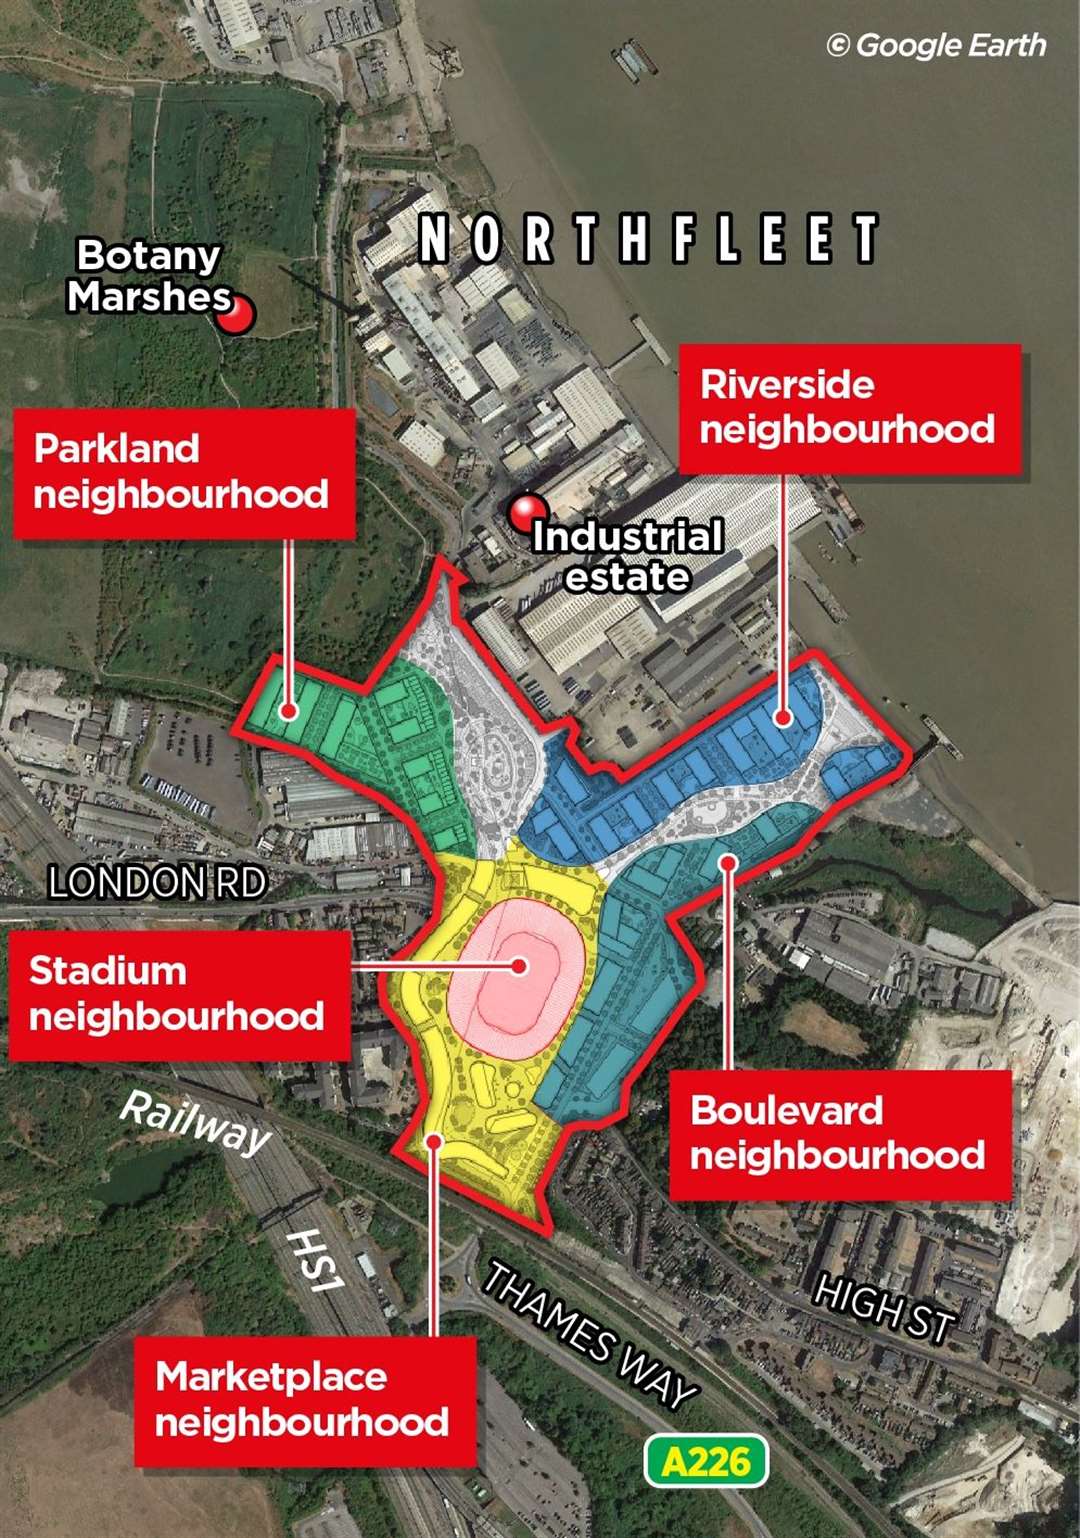 The development will be split into neighbourhoods is approved